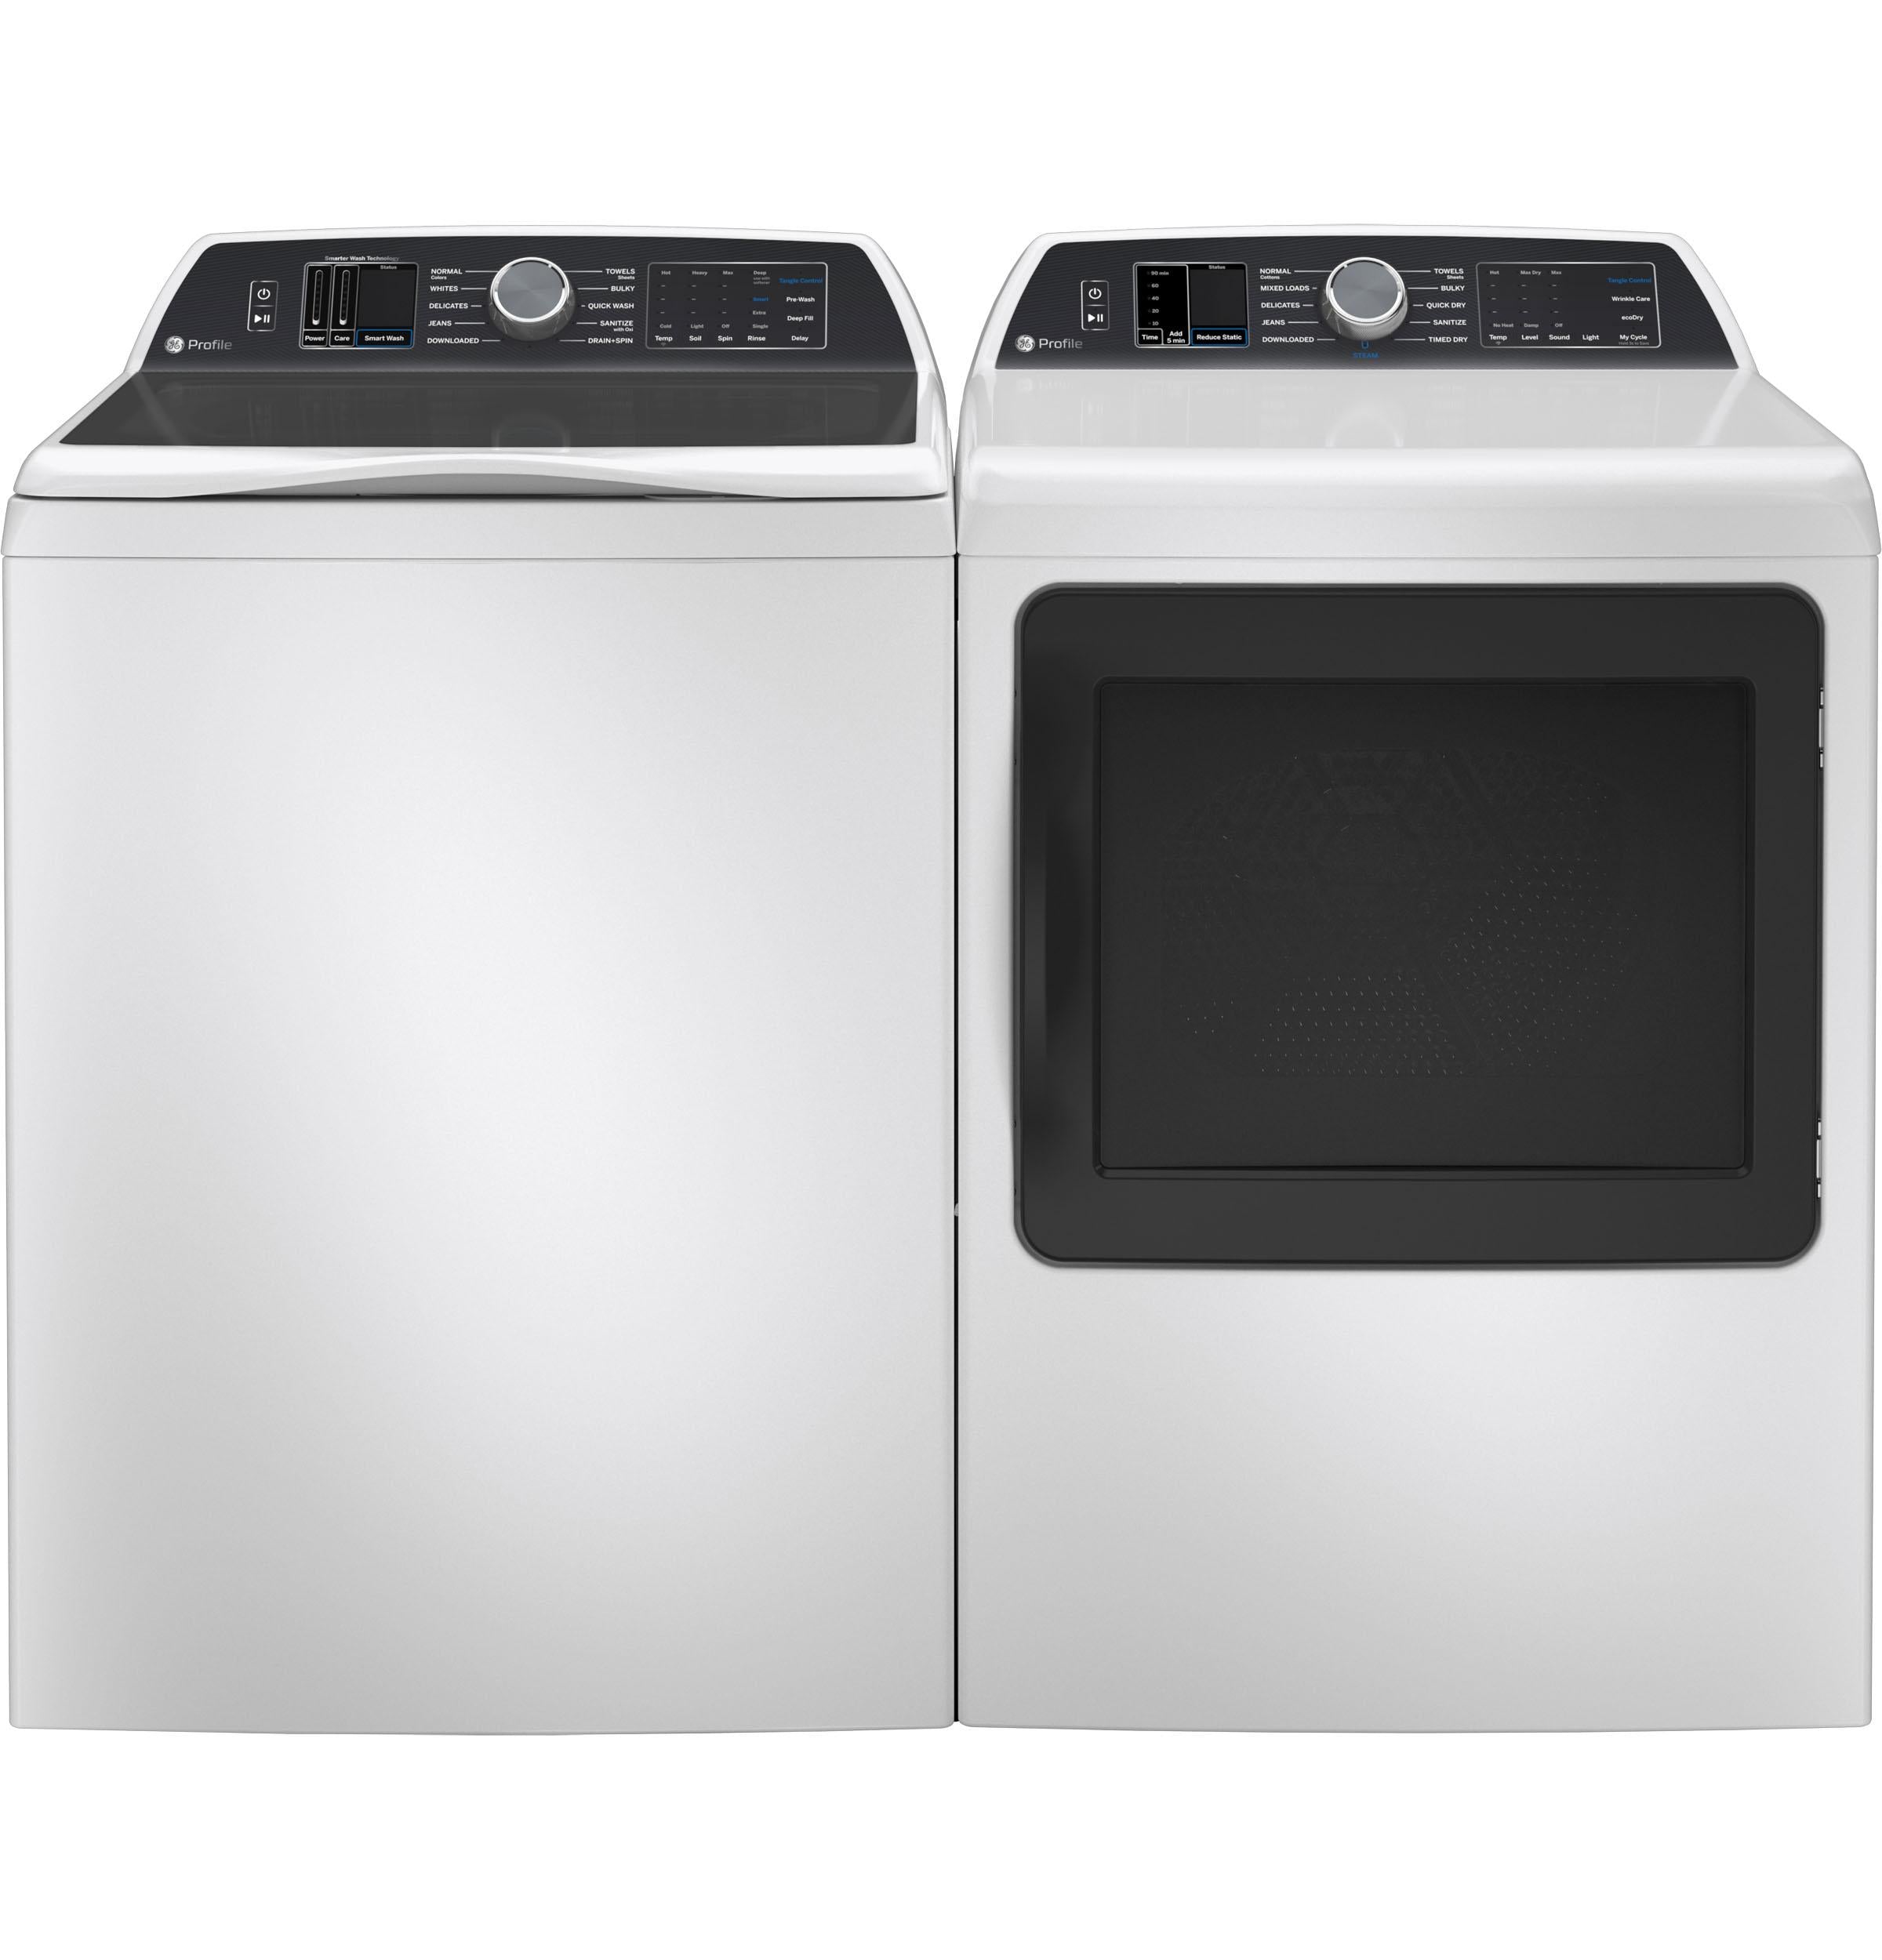 Ge Appliances PTW705BSTWS Ge Profile™ 5.3 Cu. Ft. Capacity Washer With Smarter Wash Technology And Flexdispense™